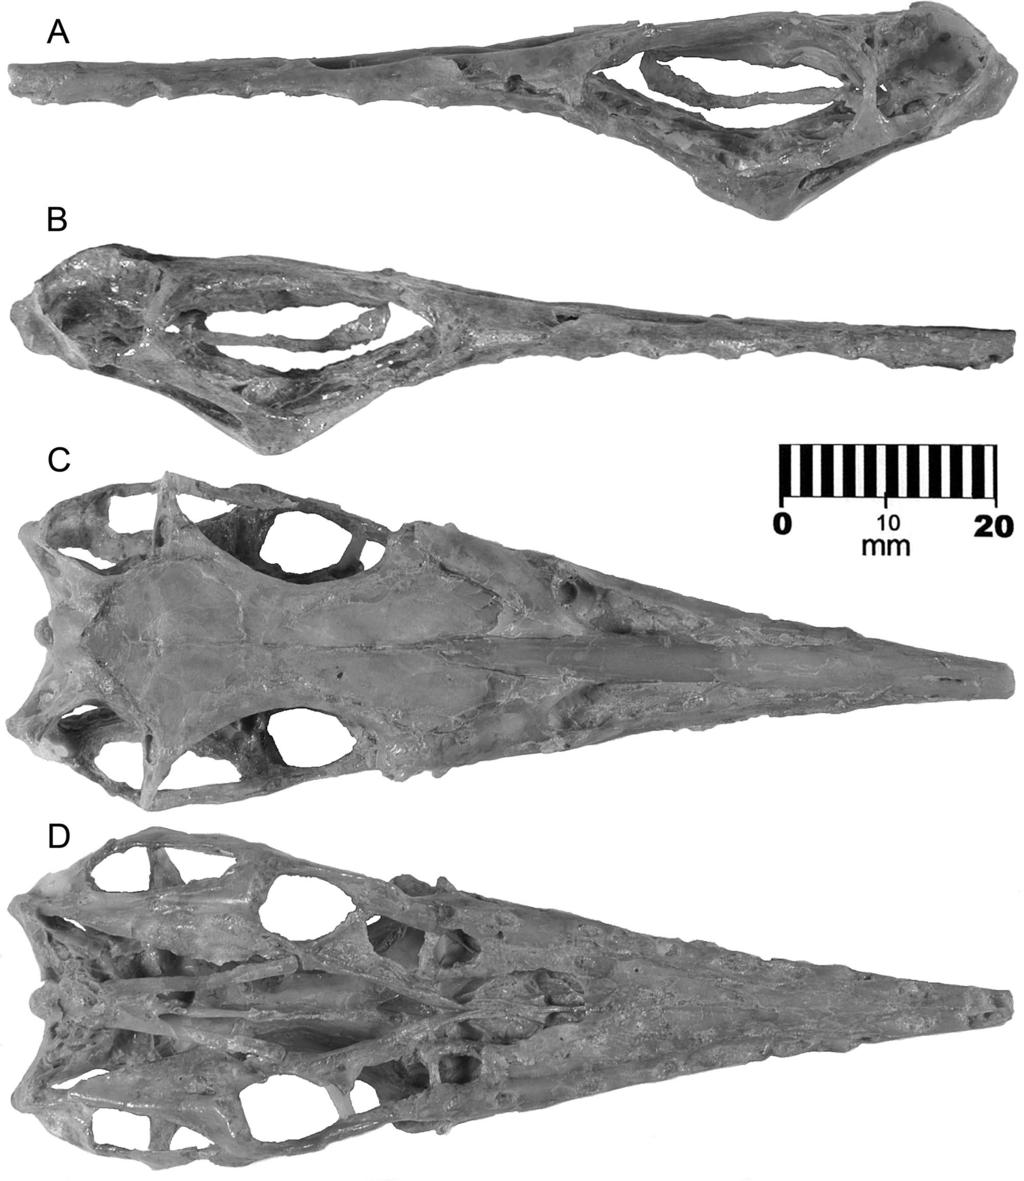 178 annals of carnegie MusEuM vol. 82 Fig. 9 CM 11434, Rhamphorhynchus muensteri. Skull in following views: A, left lateral; B, right lateral; C, dorsal; D, ventral.